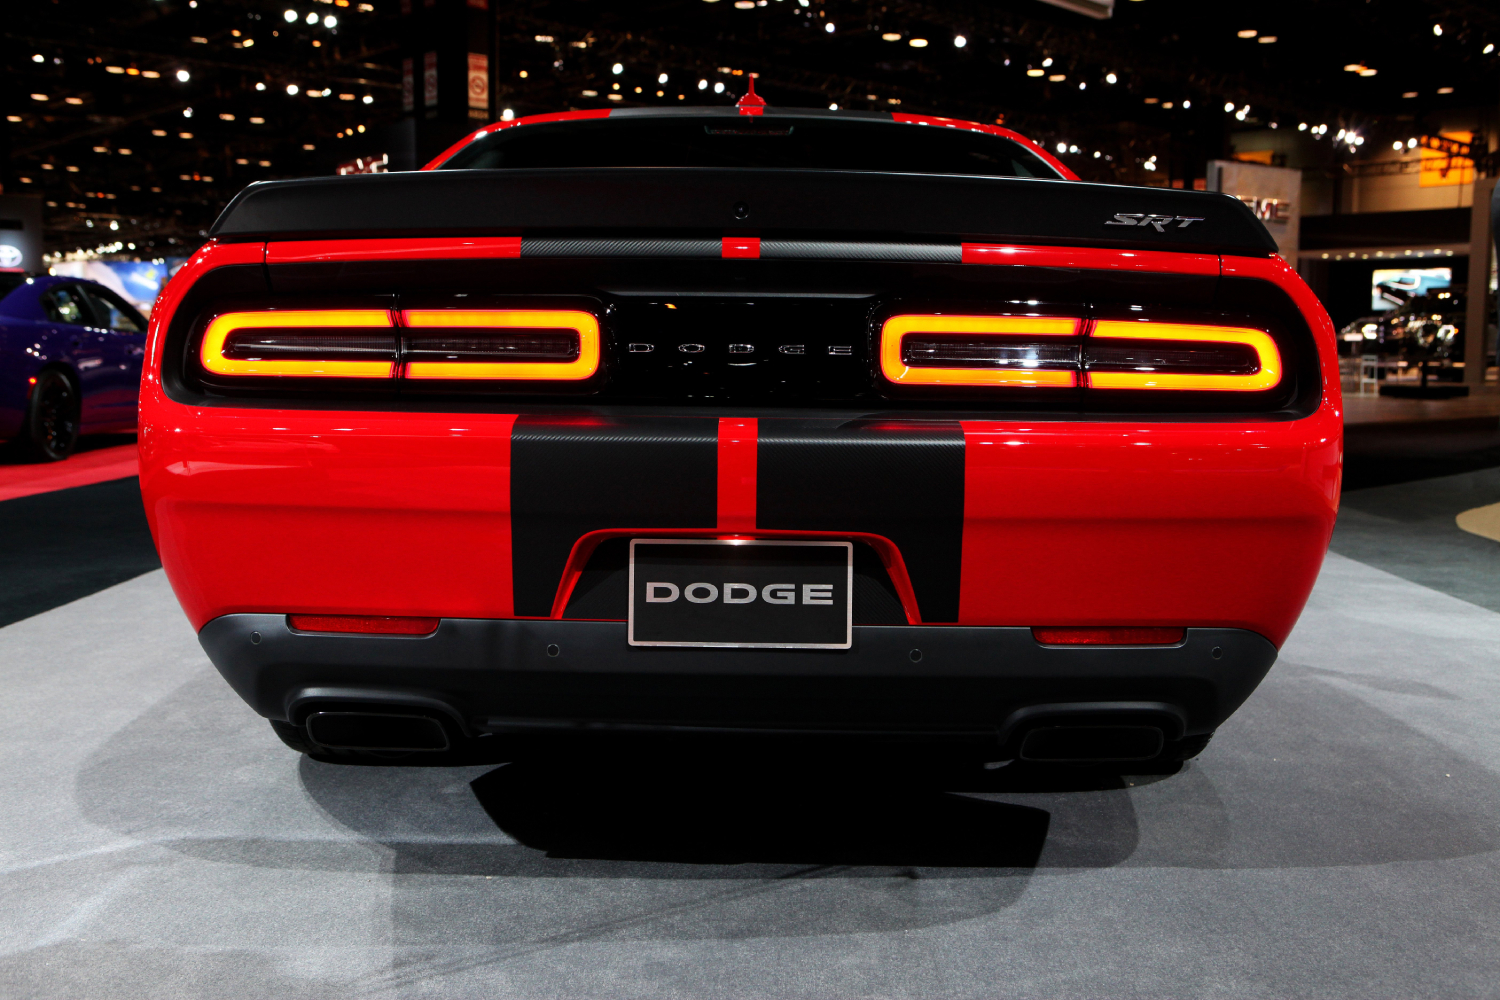 A Dodge Challenger SRT Hellcat on display at an auto show